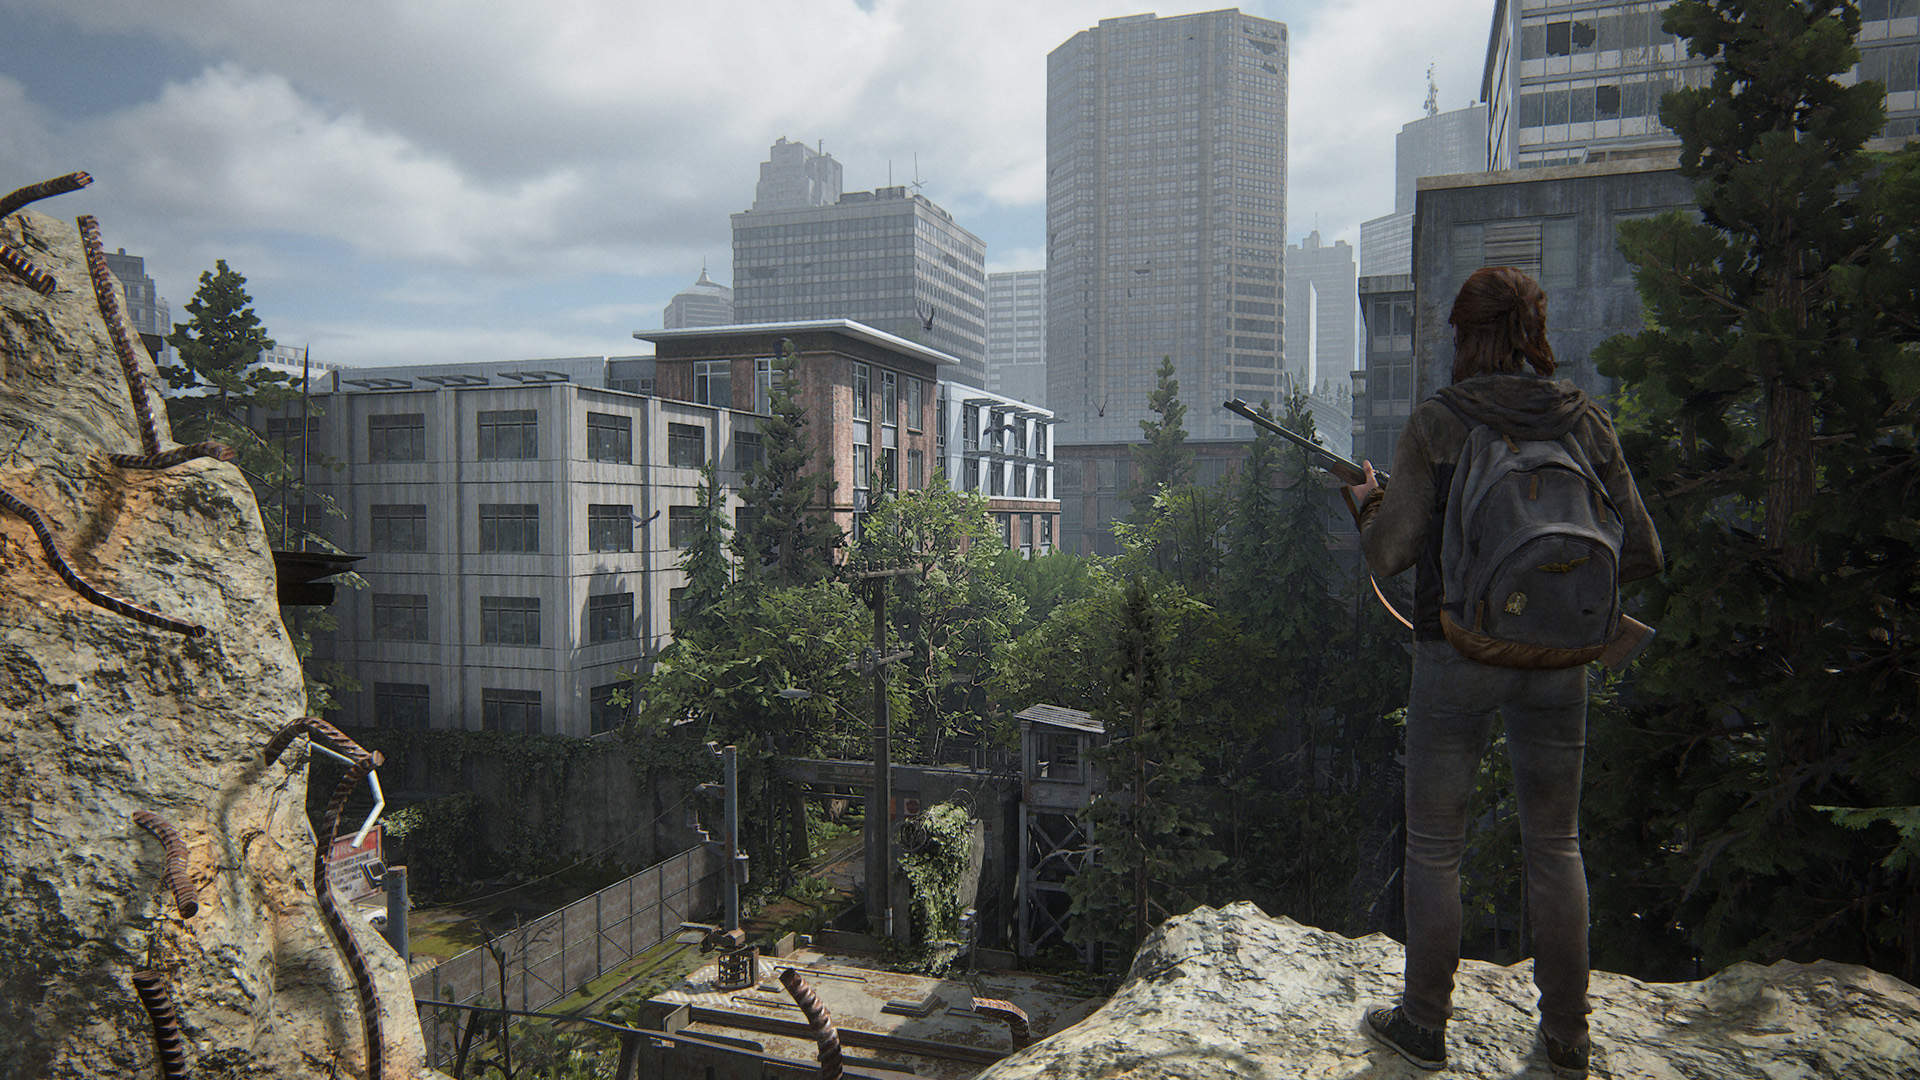 download the last of us 3 for free